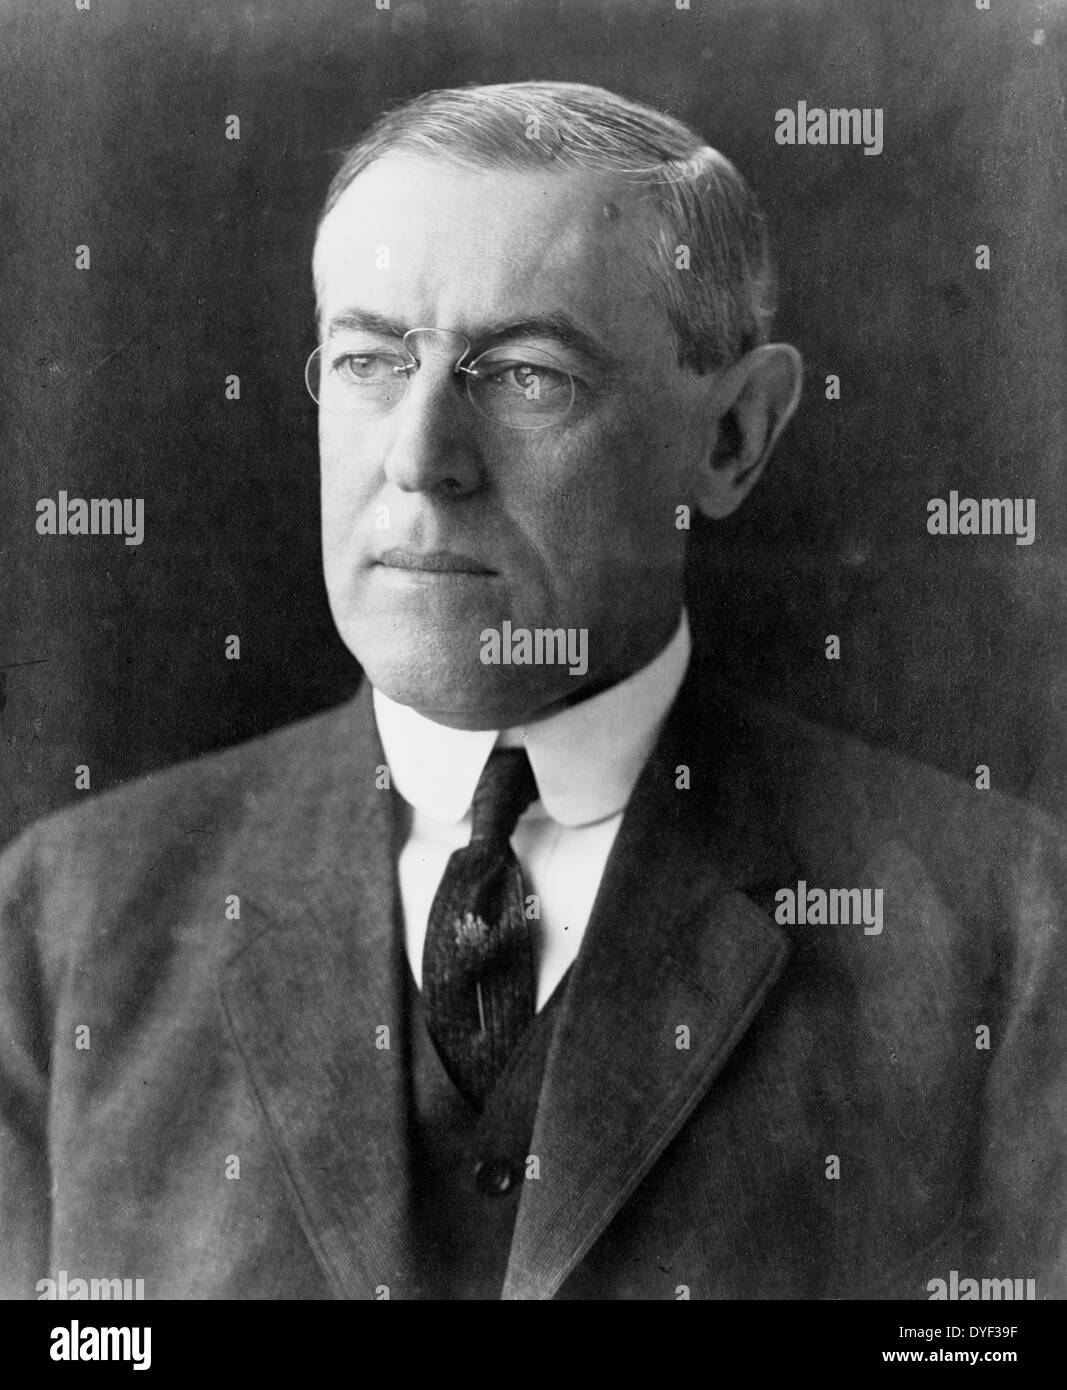 Portrait of President Woodrow Wilson 1912. 28th President of the United States in office from 1913 - 1921. During his first term in office he convinced the Democratic Congress to pass major progressive reforms.  Unknown Stock Photo